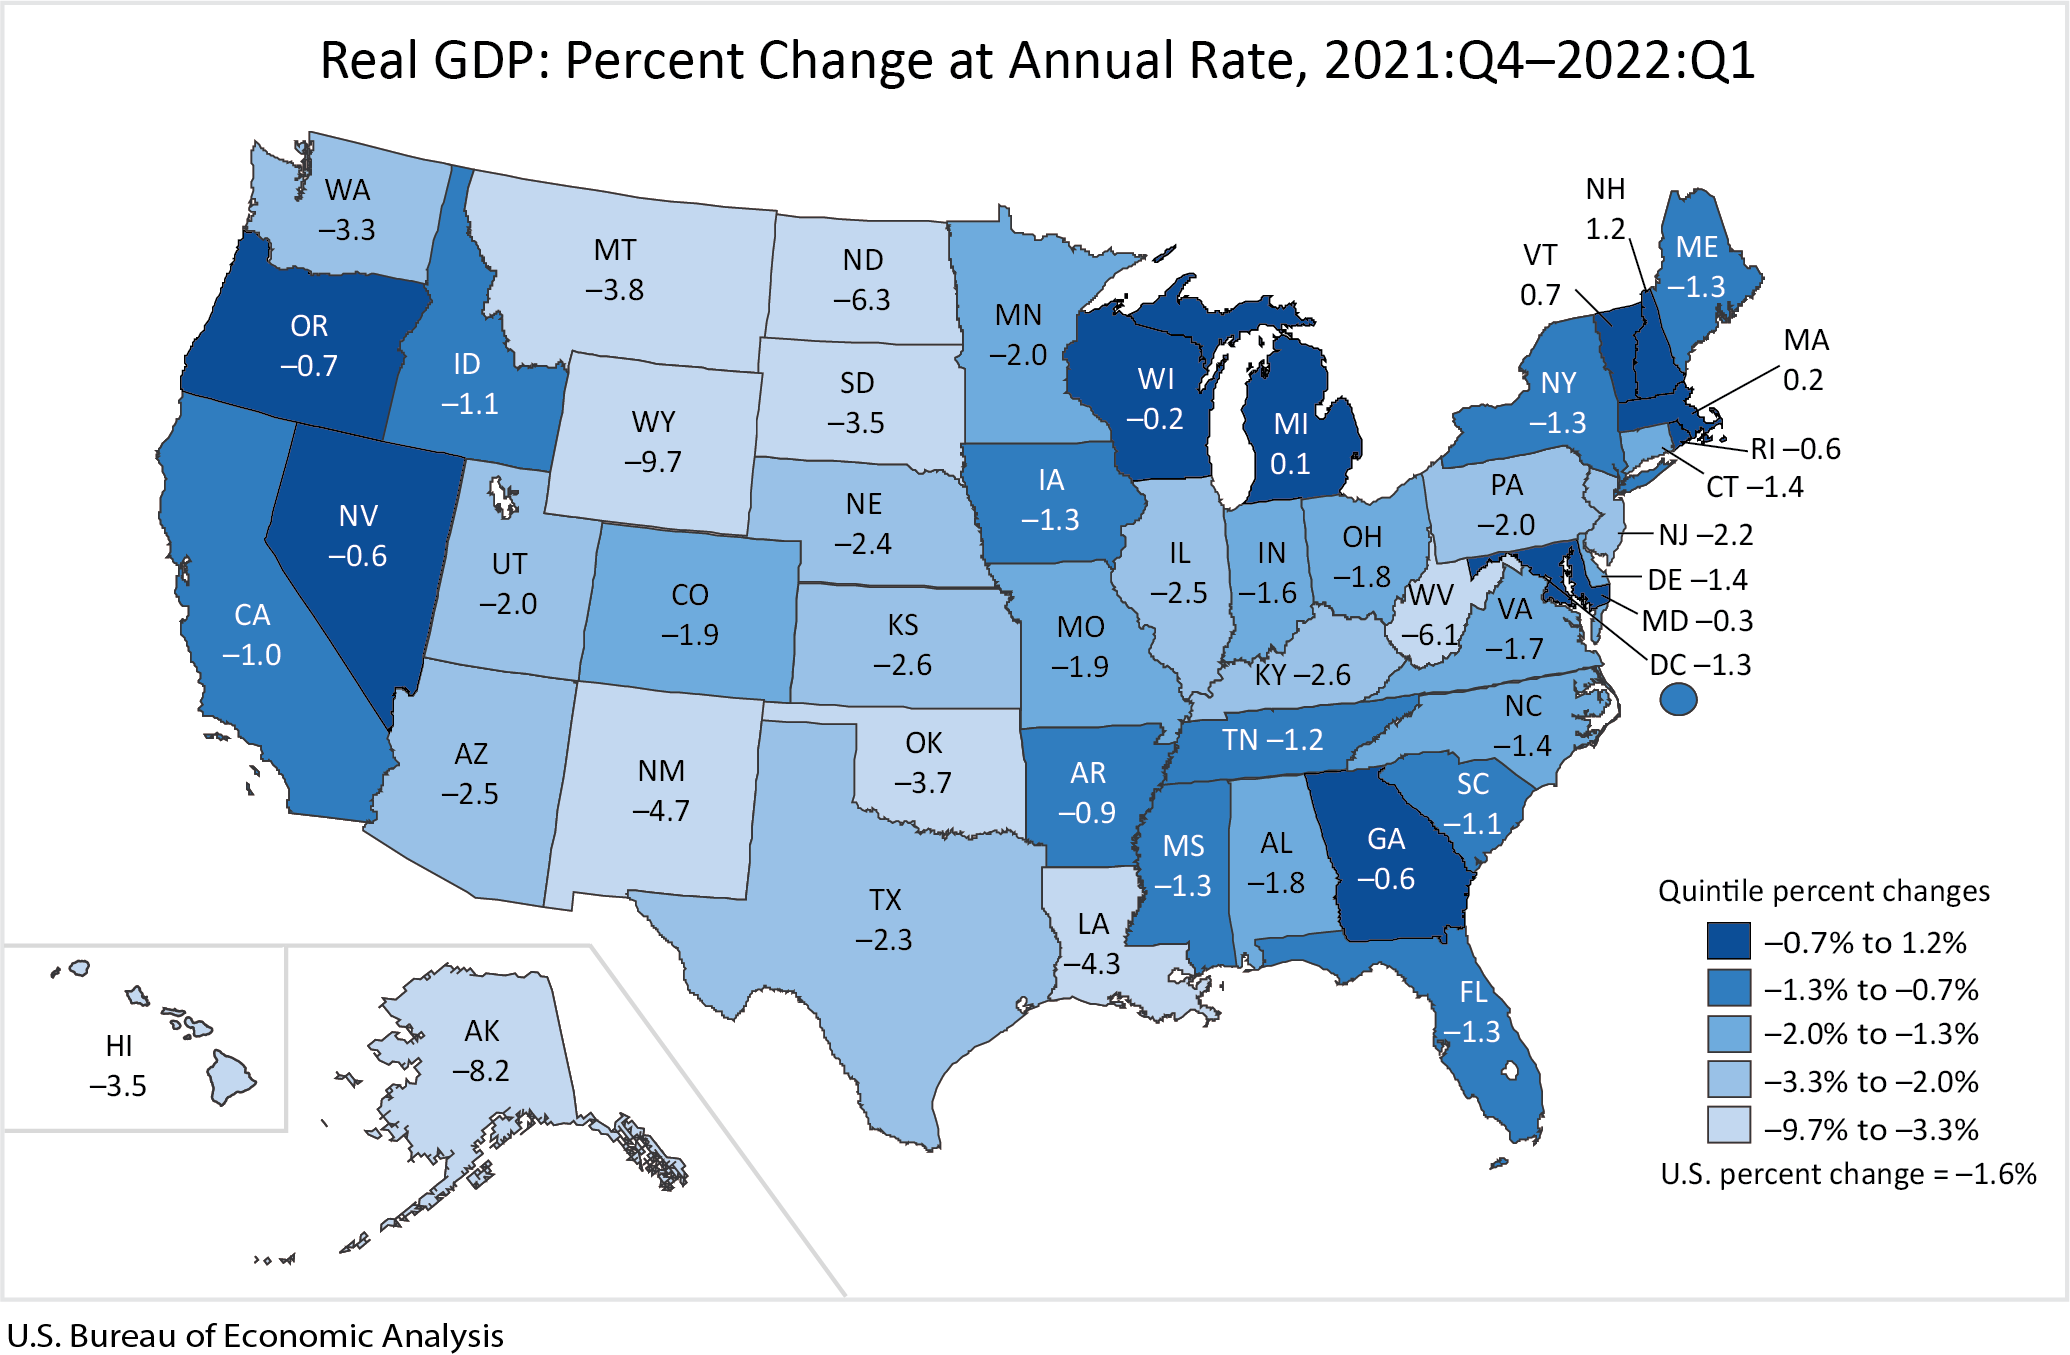 Real GDP: Percent Change at Annual Rate, 2021:Q4-2022:Q1